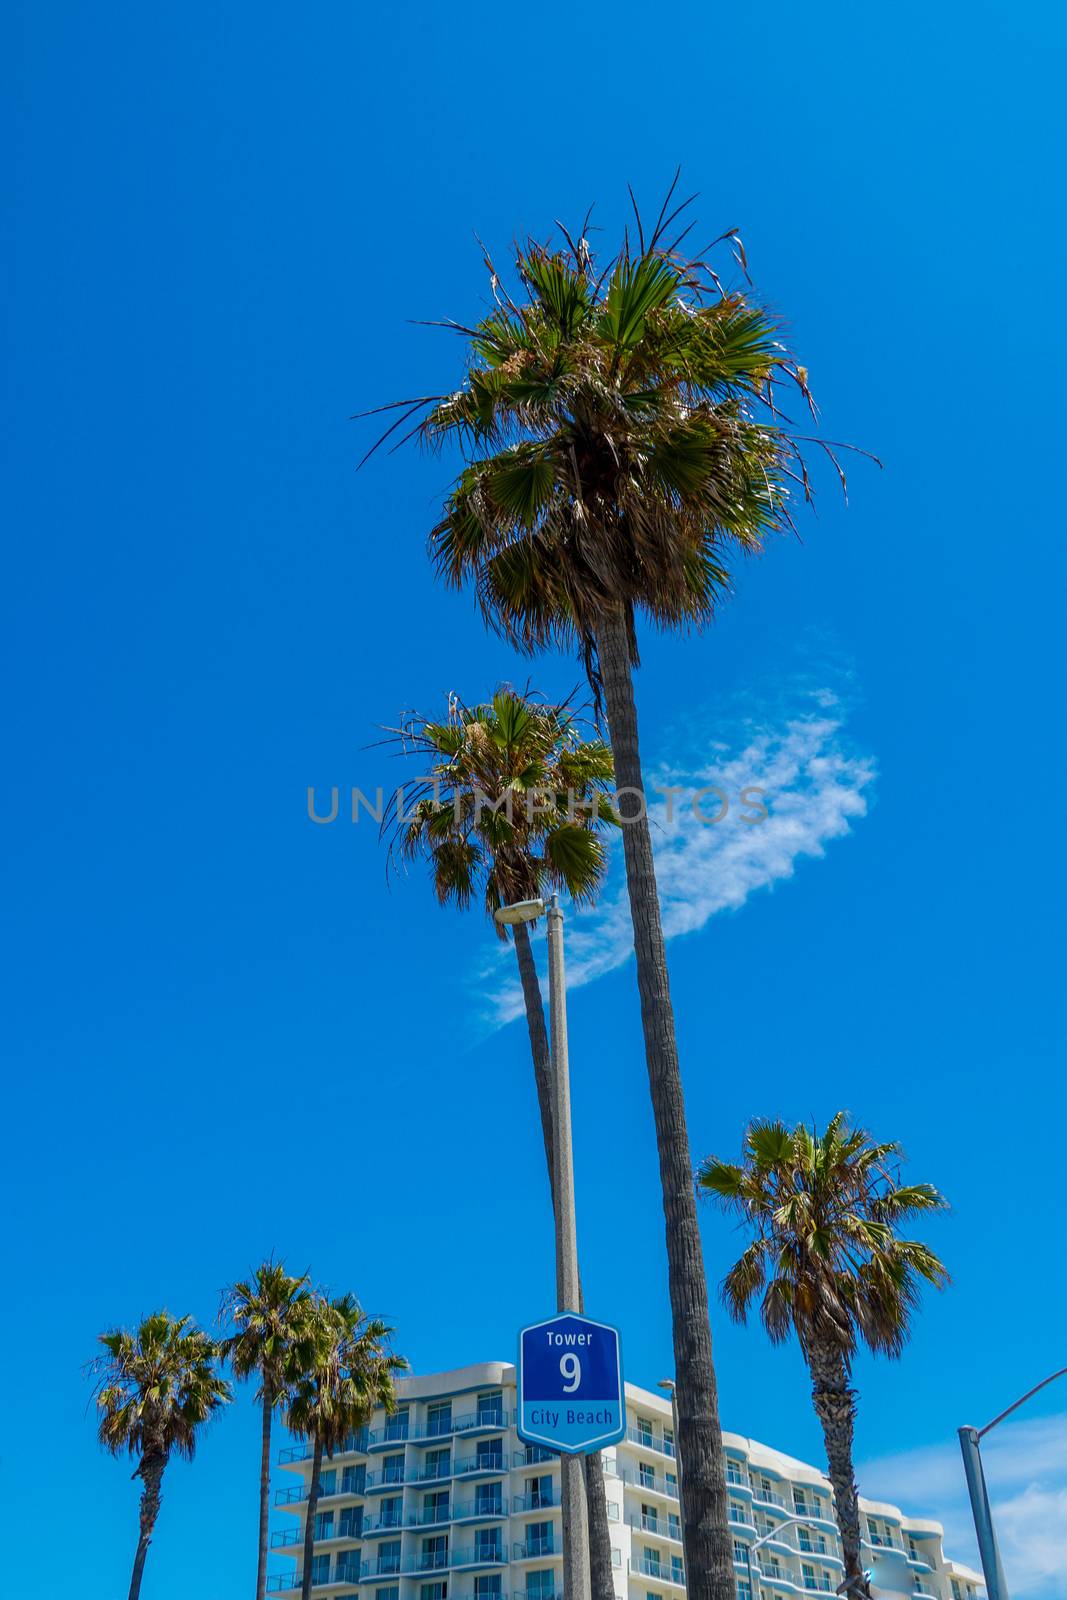 Palm trees with blue sky and building on the background by Bonandbon